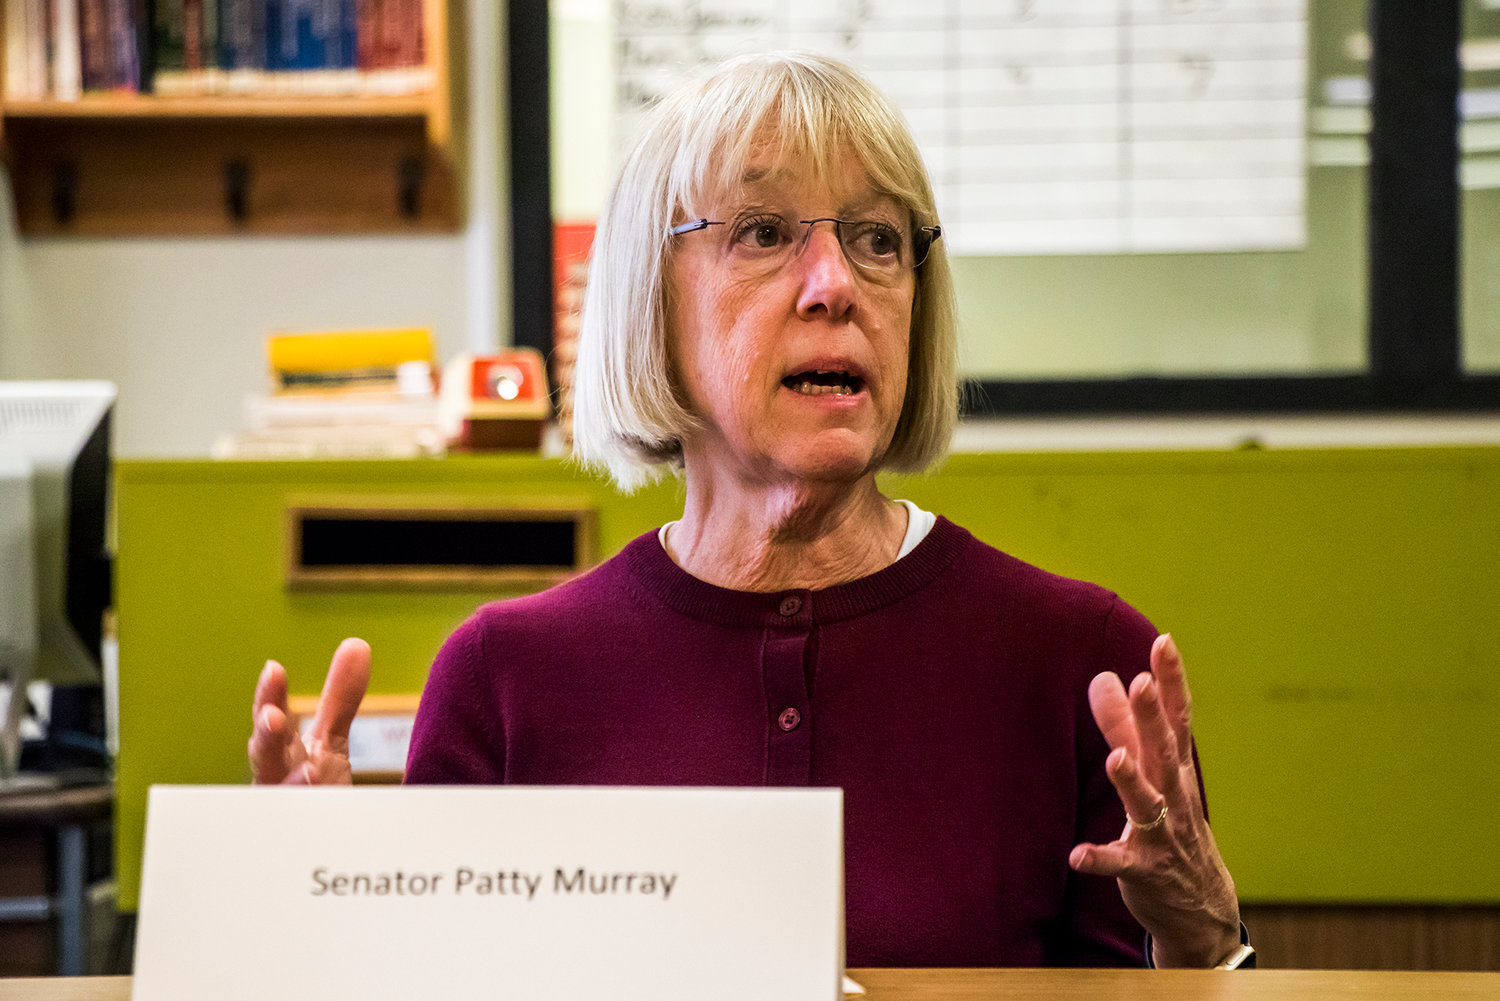 FILE PHOTO — Senator Patty Murray attends a meeting with members of the community and school district at Toledo High School in 2018.